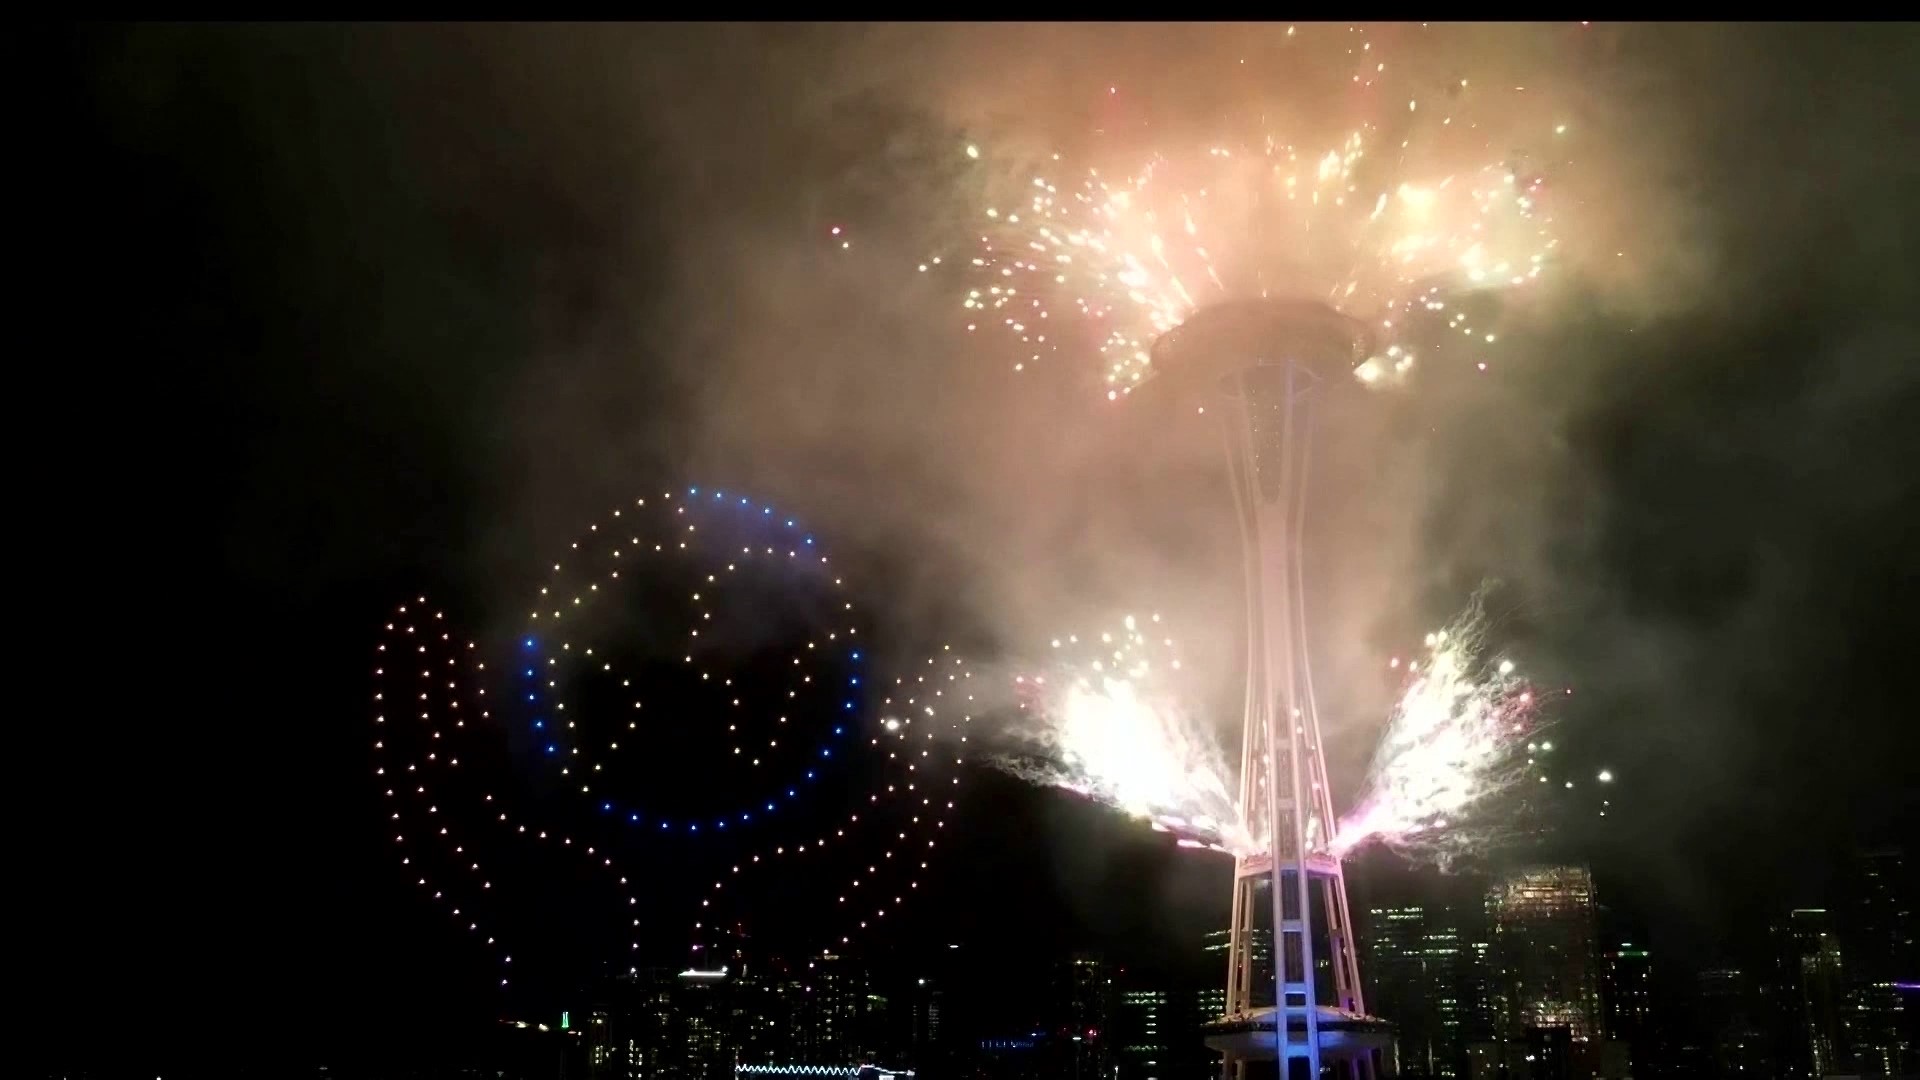 The event was the first in-person New Year's Eve celebration at the Space Needle since the beginning of the pandemic.